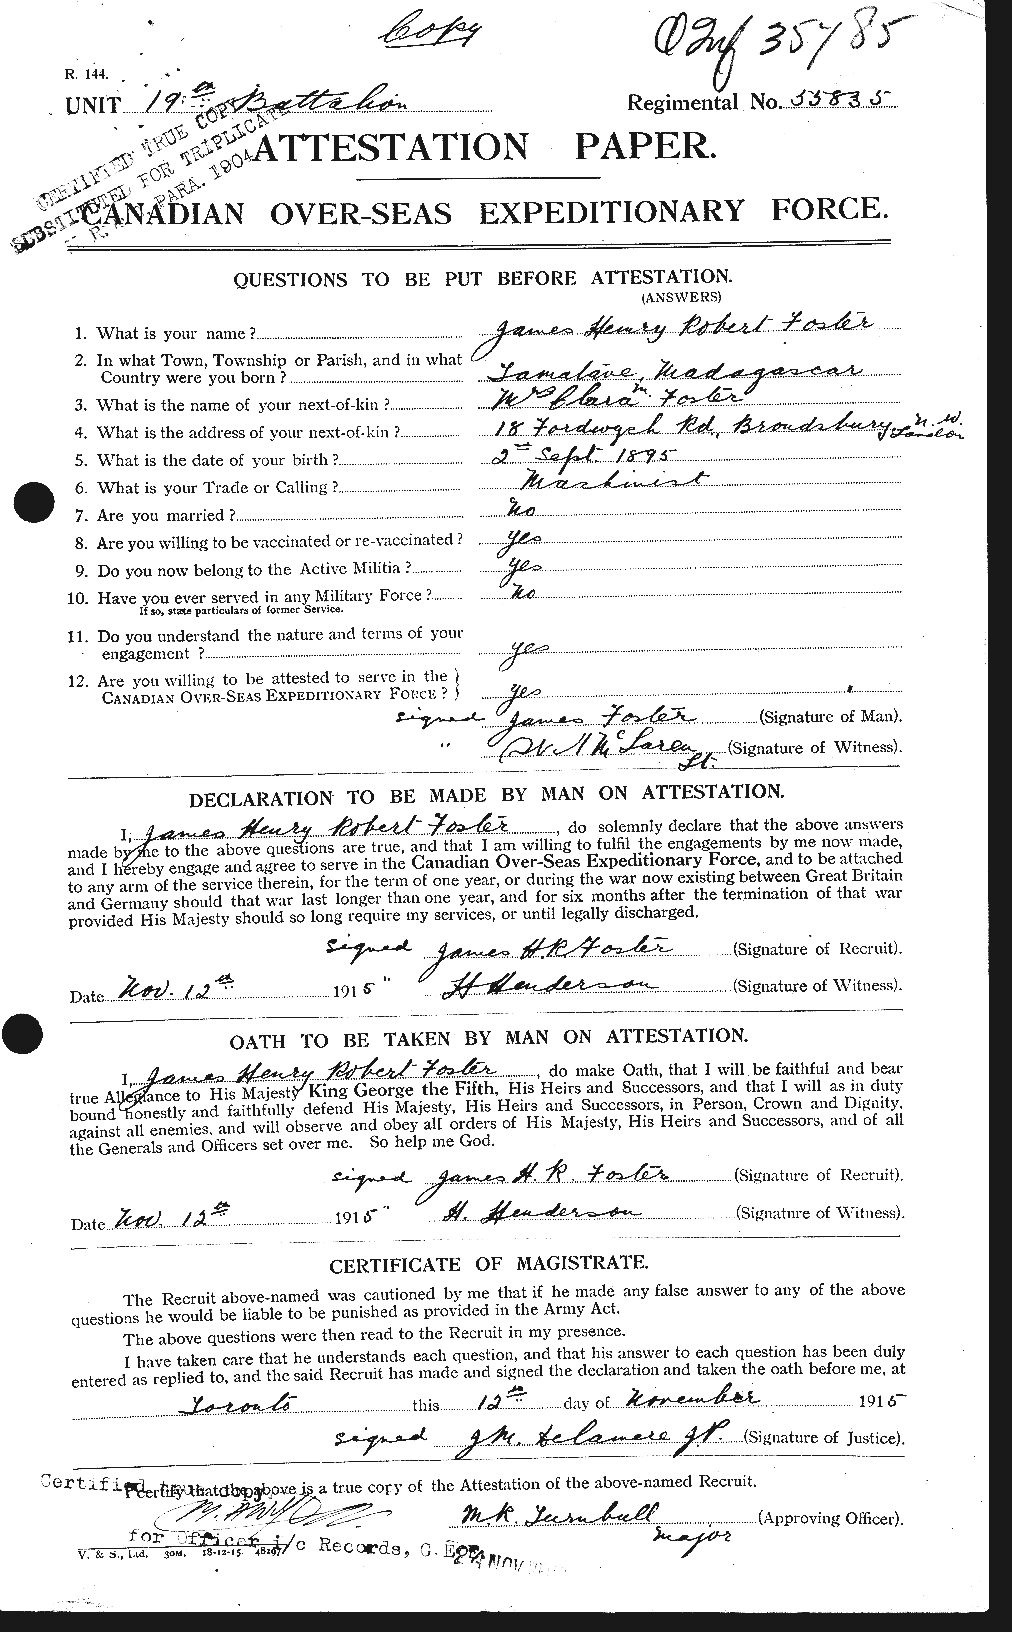 Personnel Records of the First World War - CEF 333307a